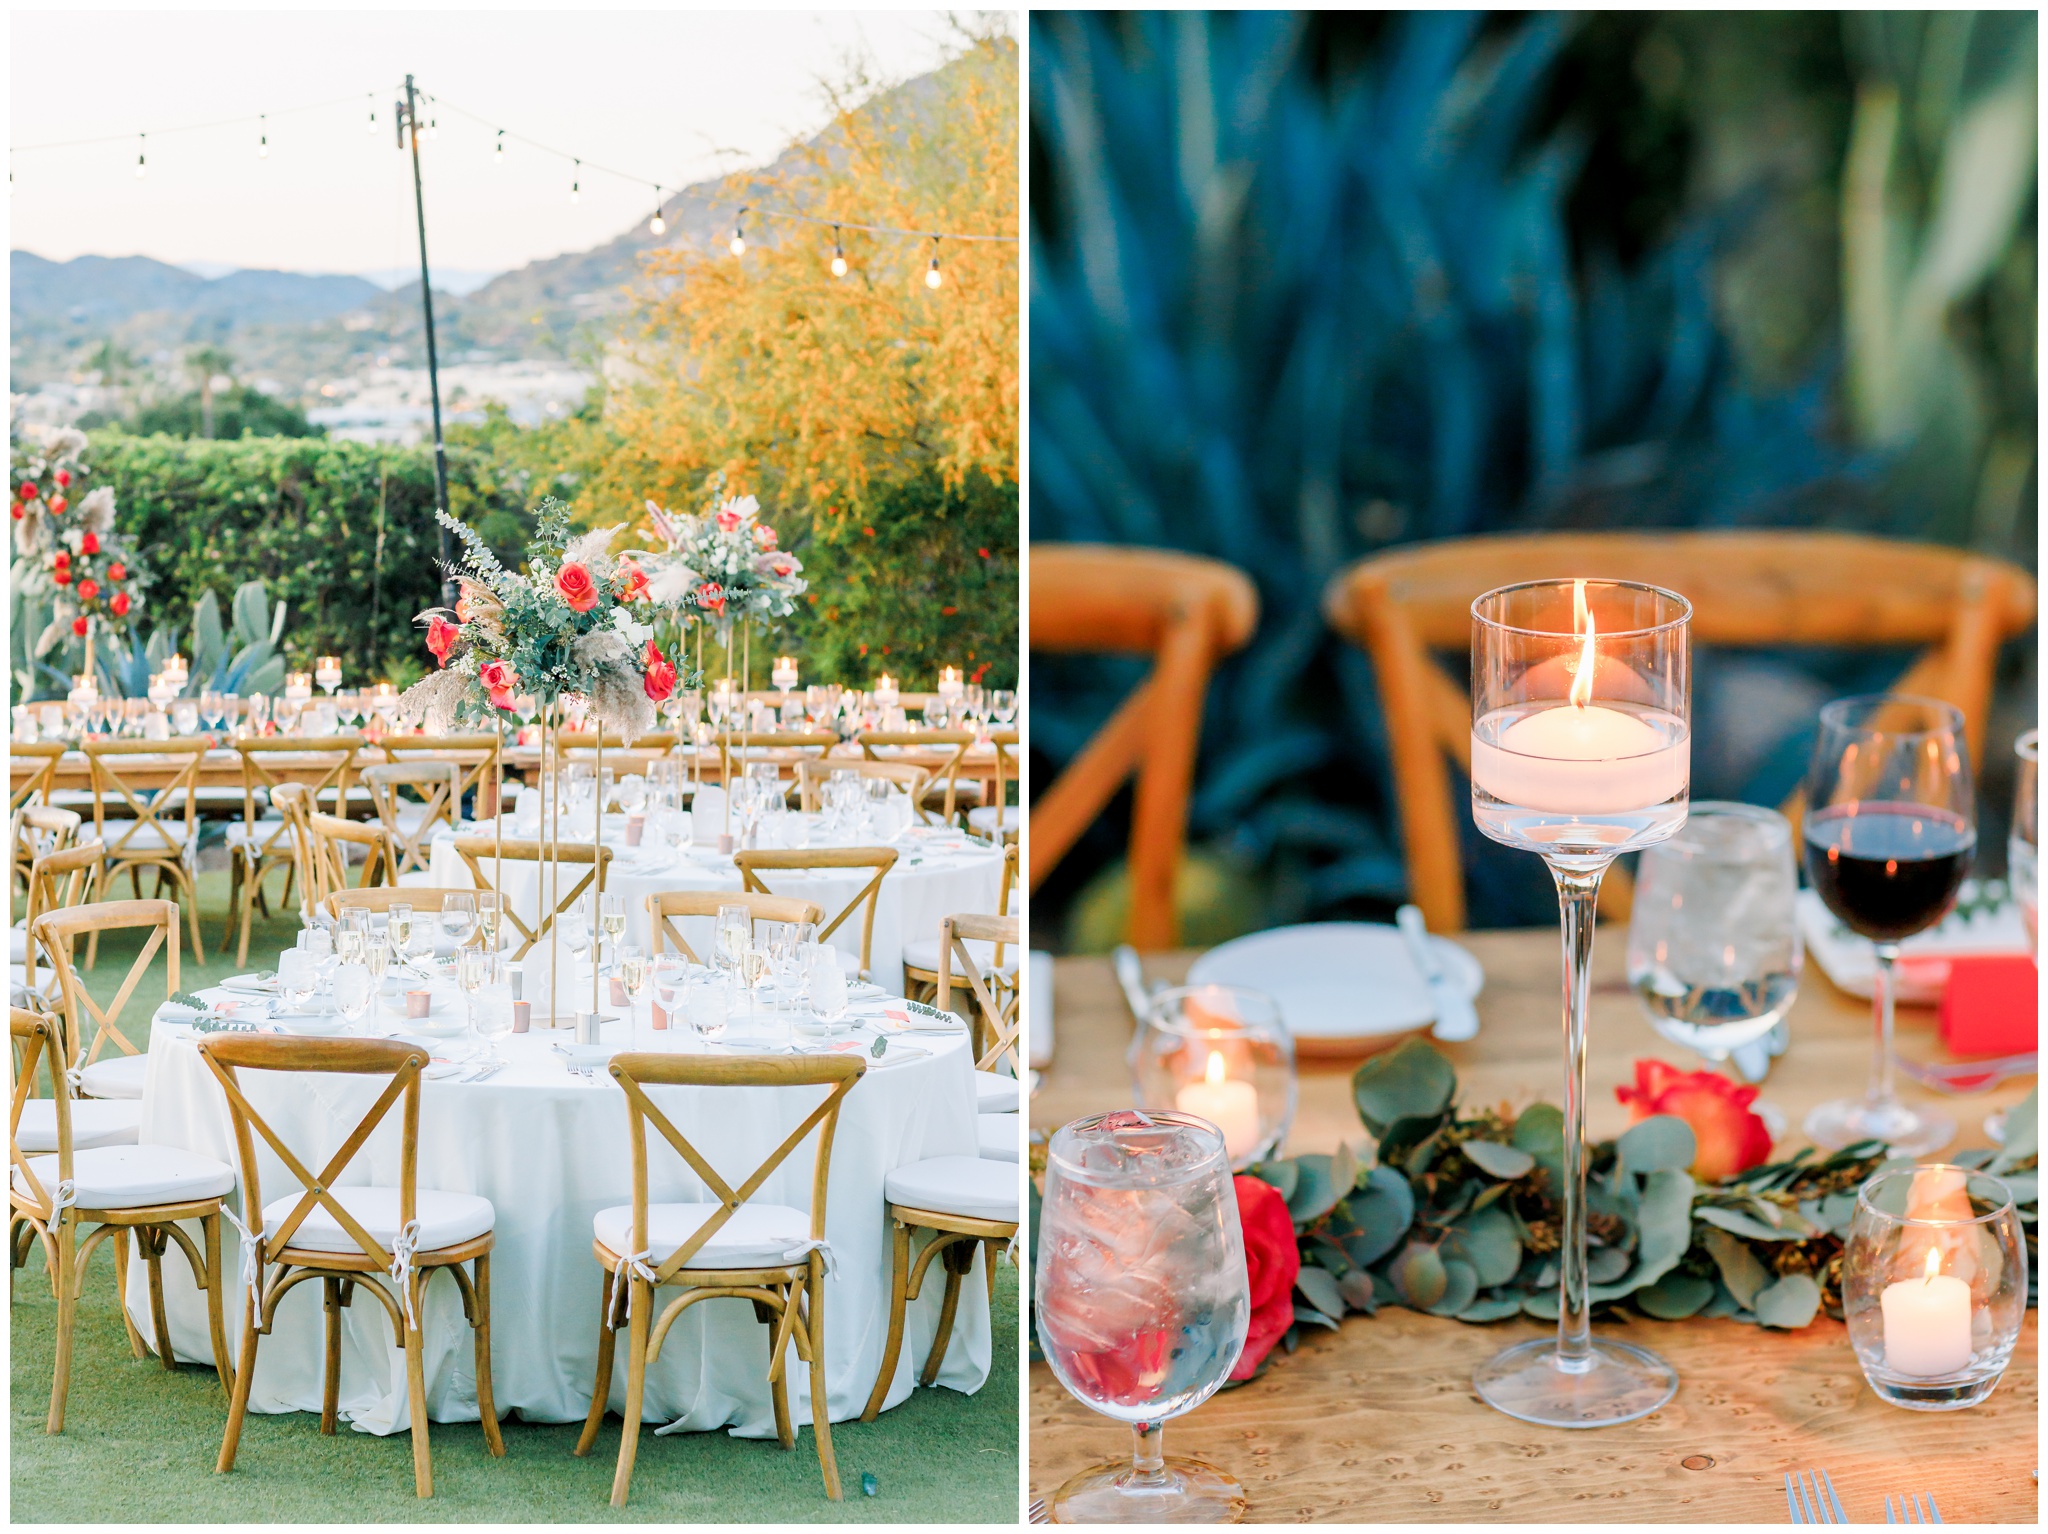 Reception decor set upon the lawn at Sanctuary at Camelback